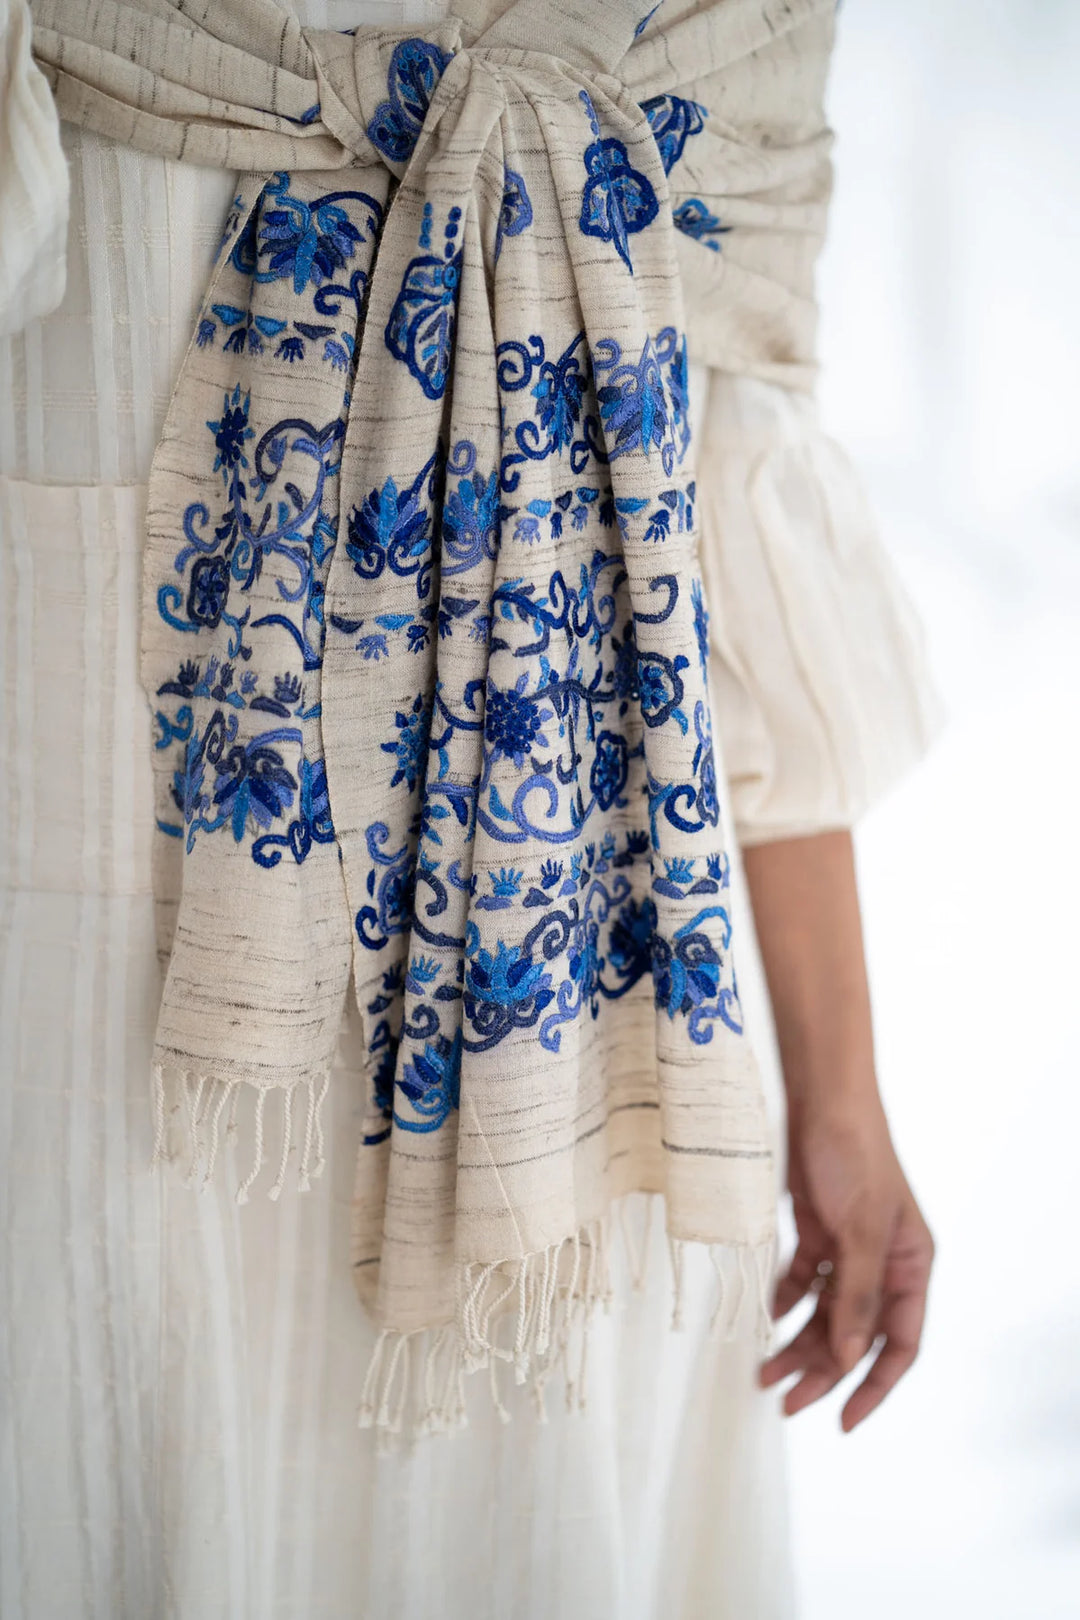 Silk Stole in Off-White & Blue - Elegant and Versatile | Ebullient Ghicha Silk Stole - Off-white & Blue